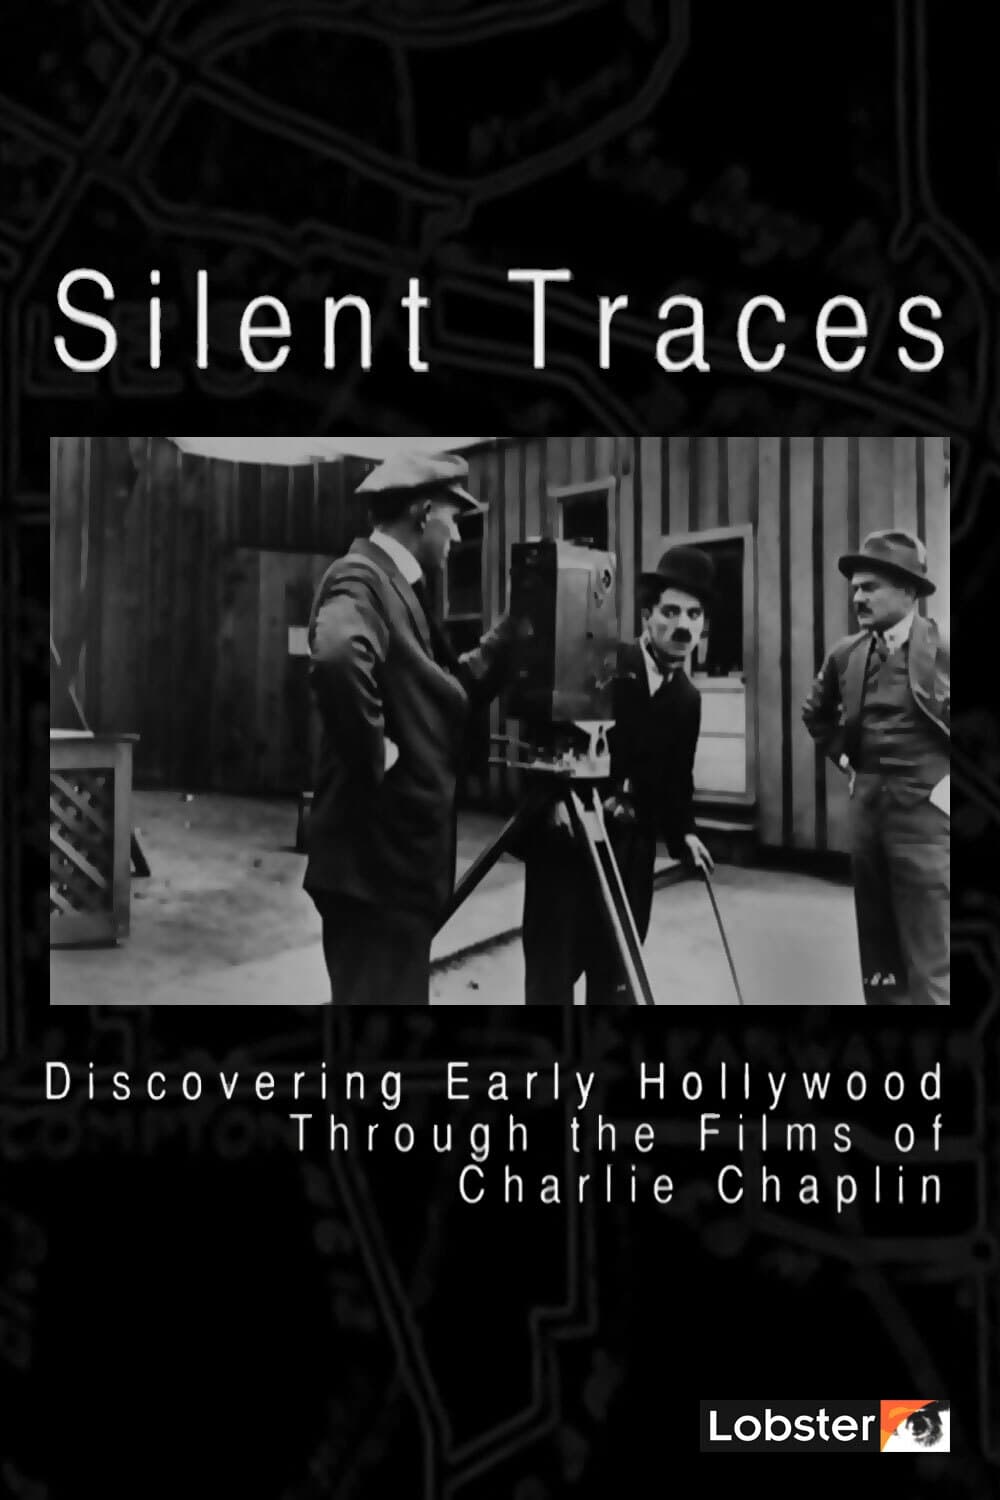 Caratula de Silent Traces: Discovering Early Hollywood Through the Films of Charlie Chaplin (Silent Traces) 